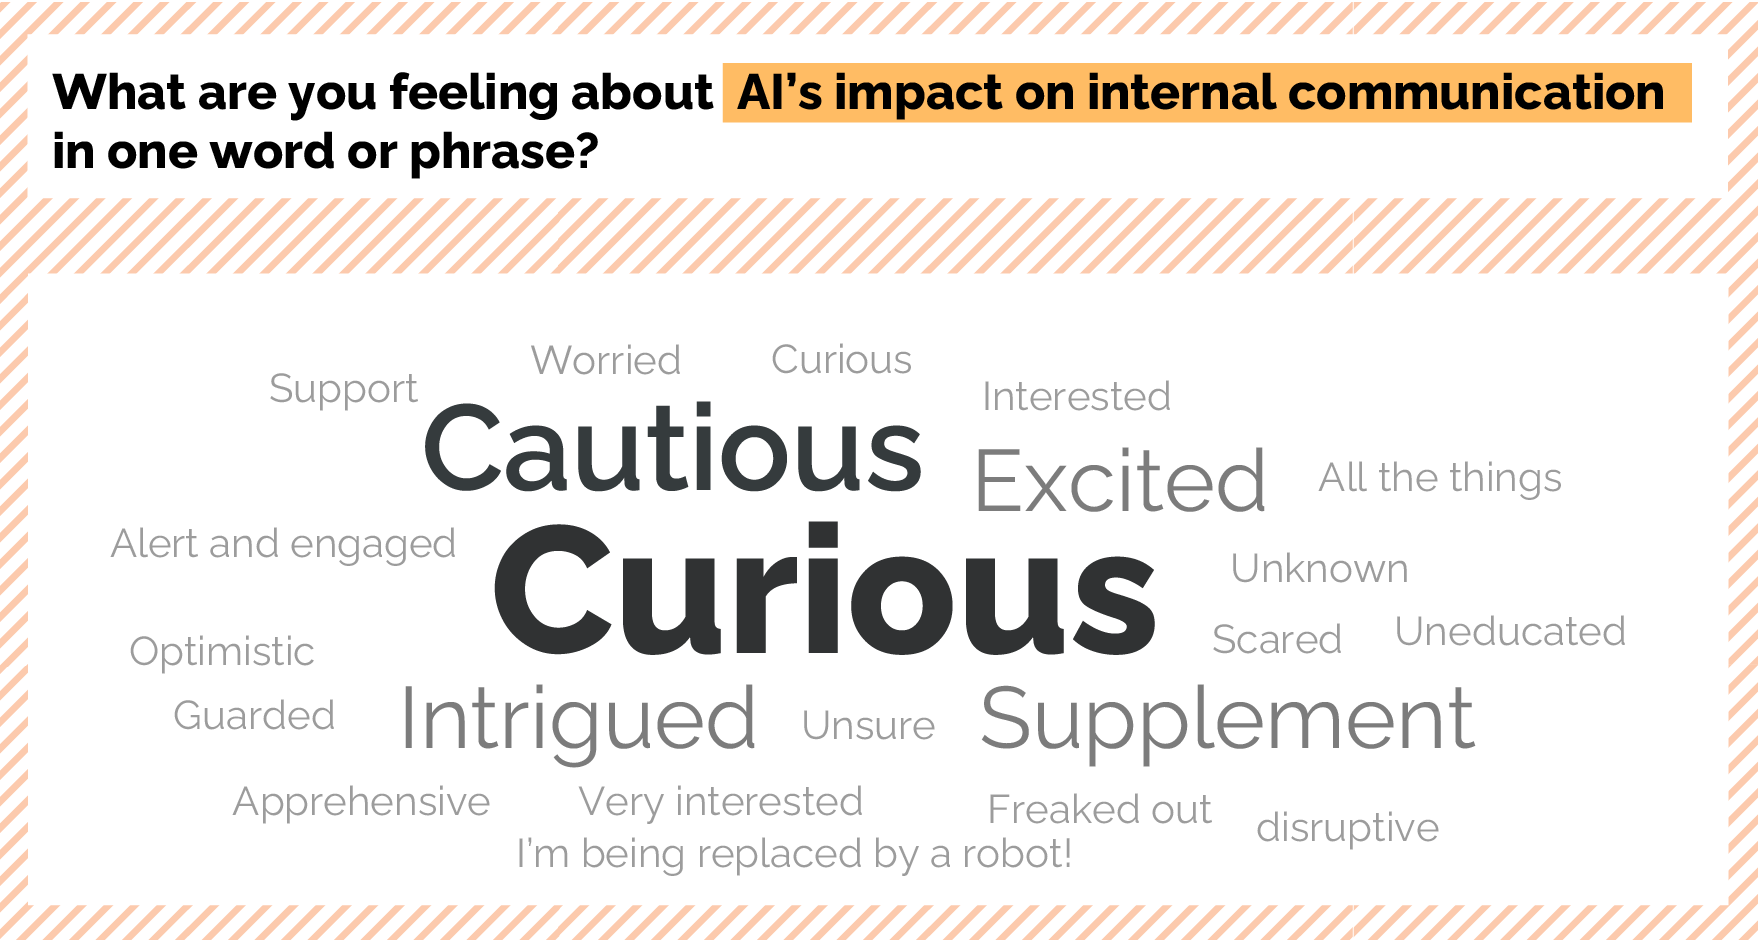 Wordcloud featuring Curious Cautious Intrigued and Excited as the biggest words